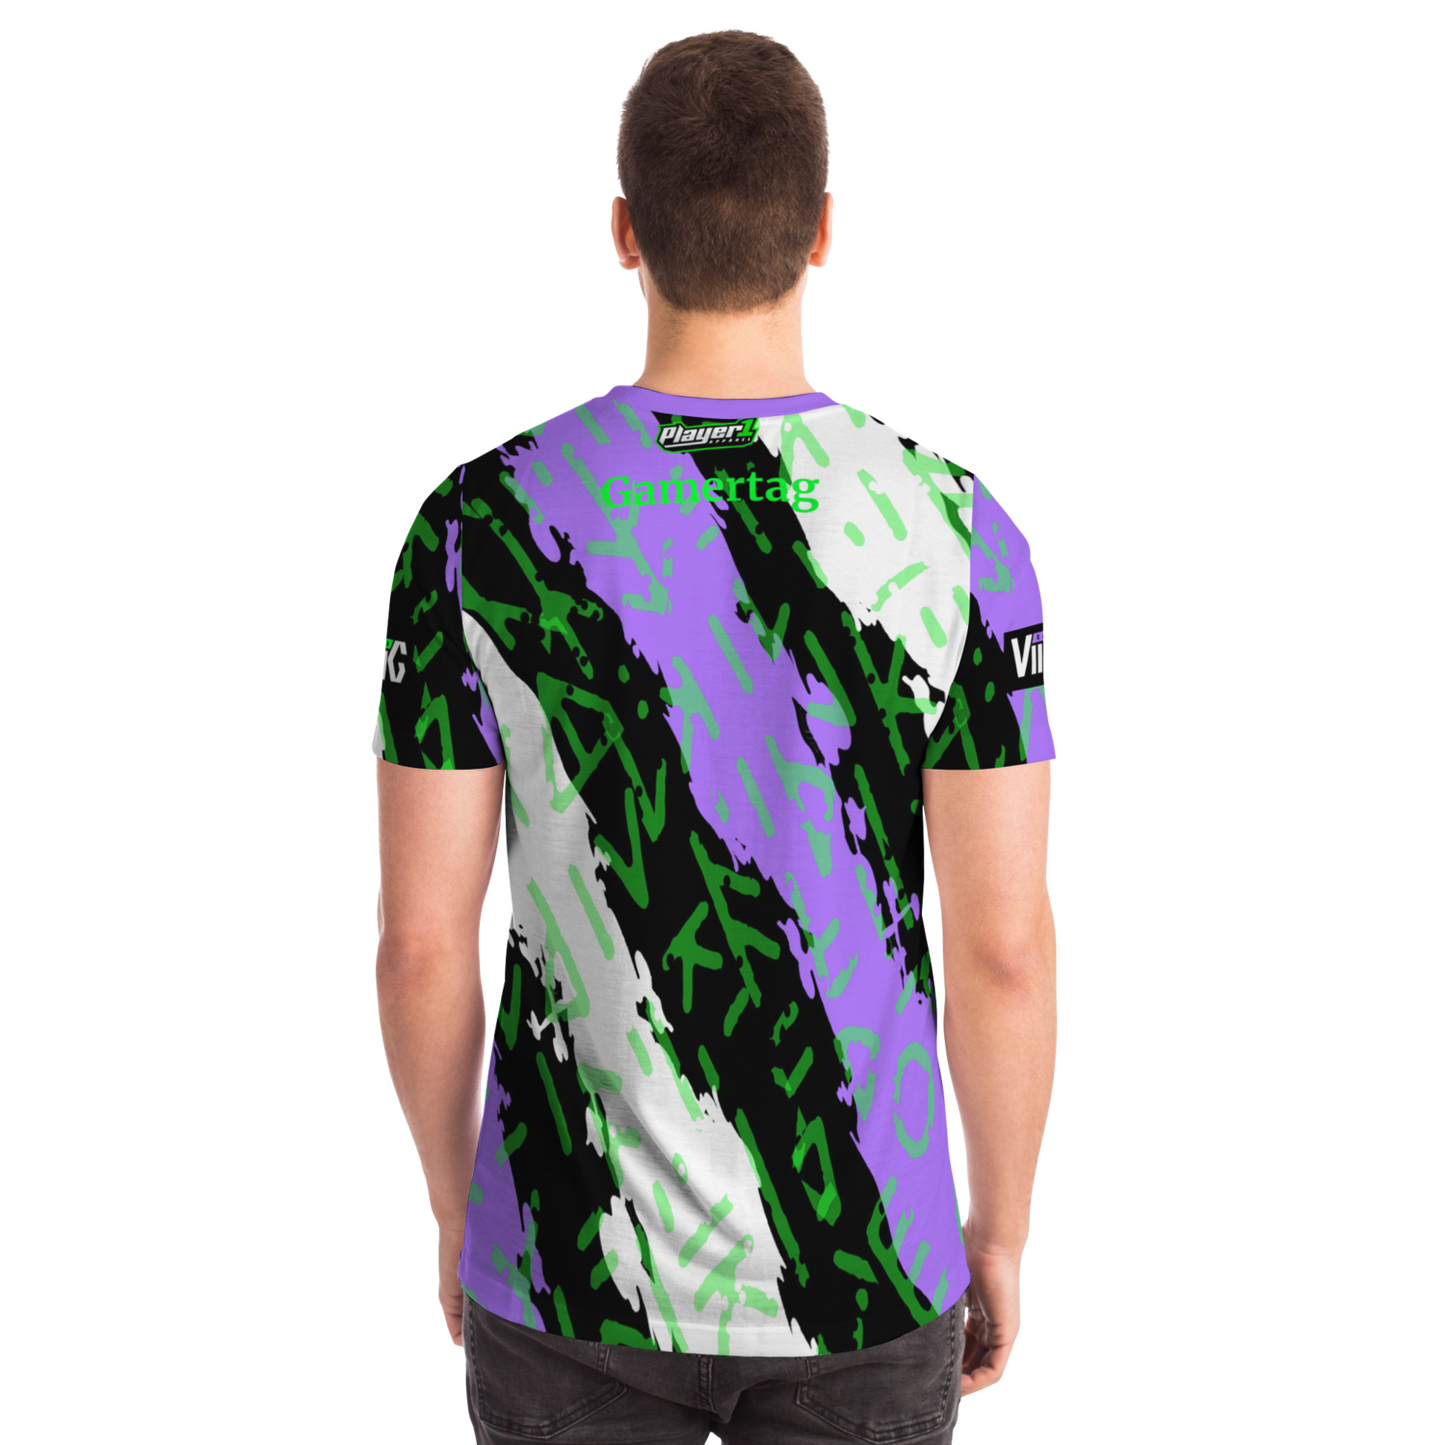 Rated R Viking Green Runes Pro Jersey